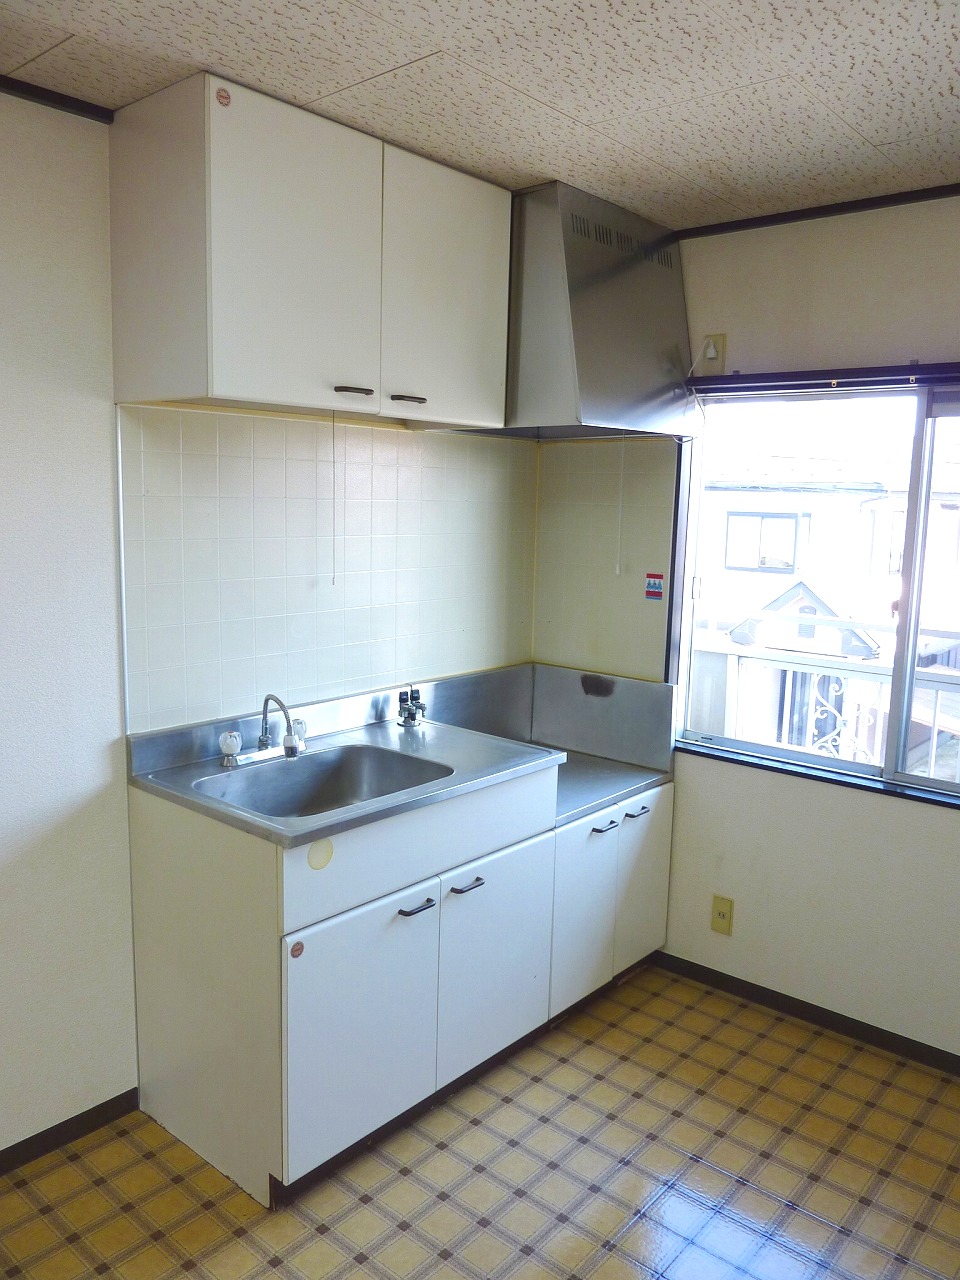 Kitchen. It is a kitchen with a small window ☆ Economic city gas ☆ 